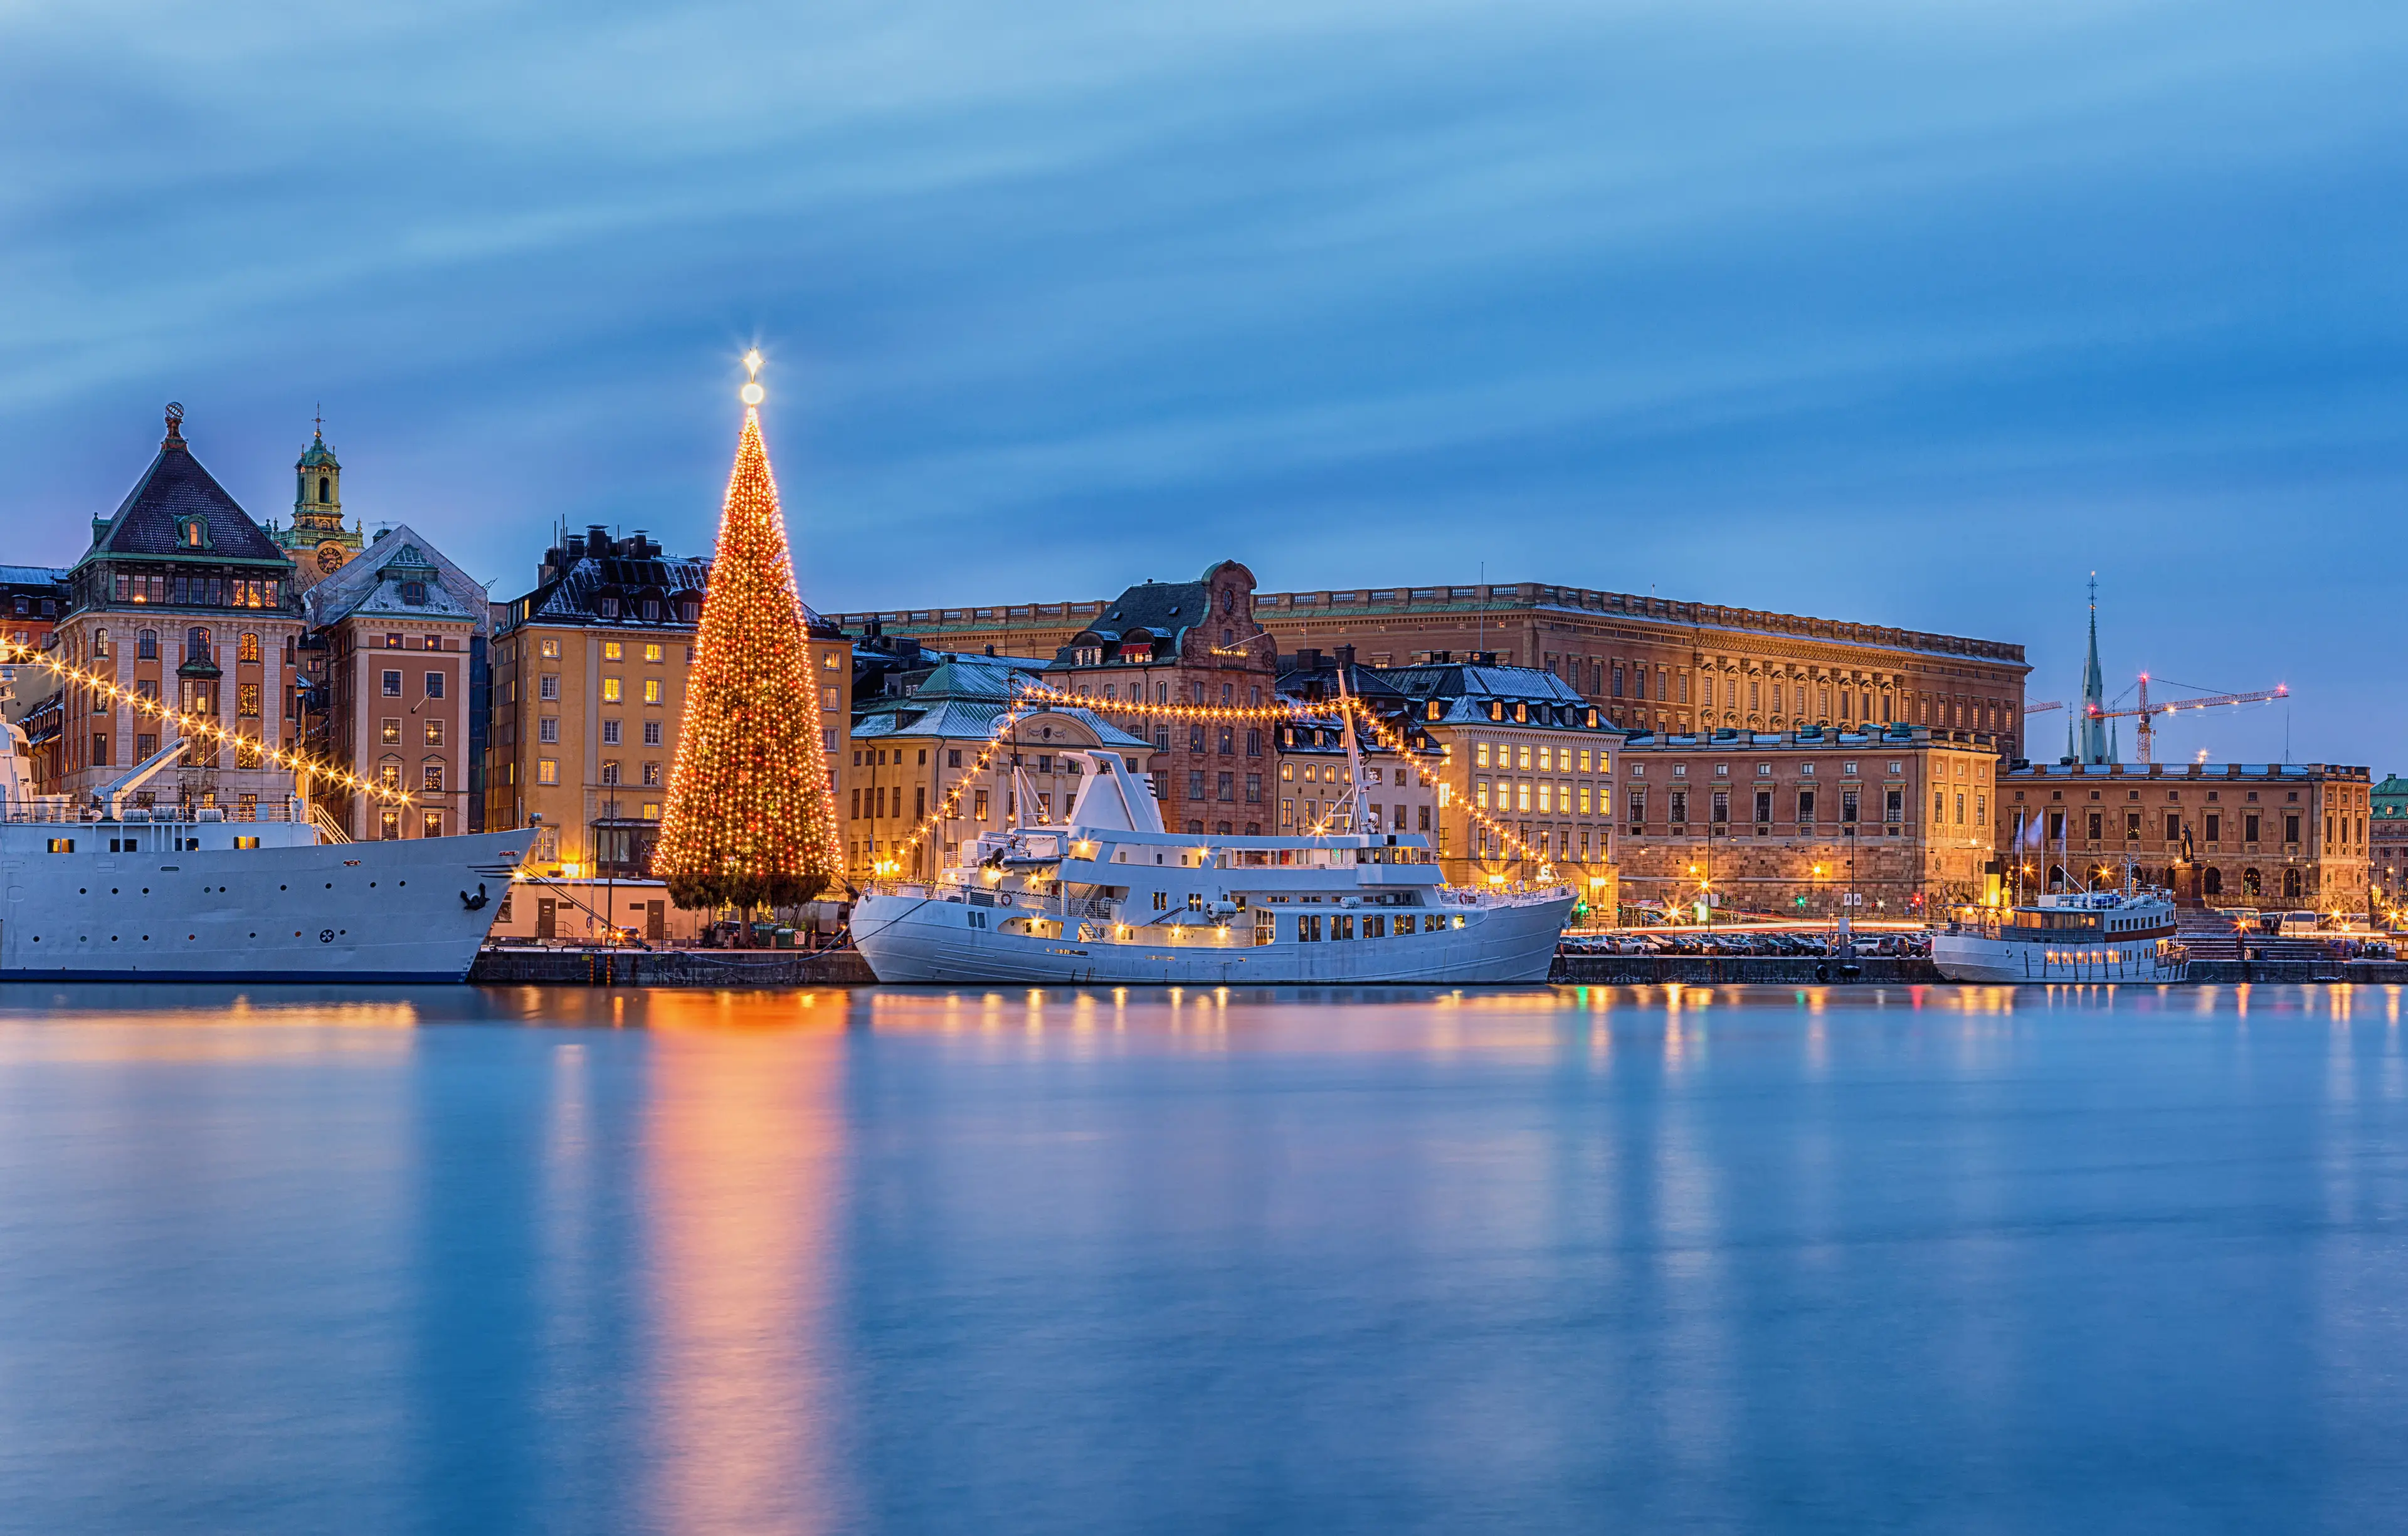 5-Day Christmas Holiday Itinerary in Stockholm, Sweden